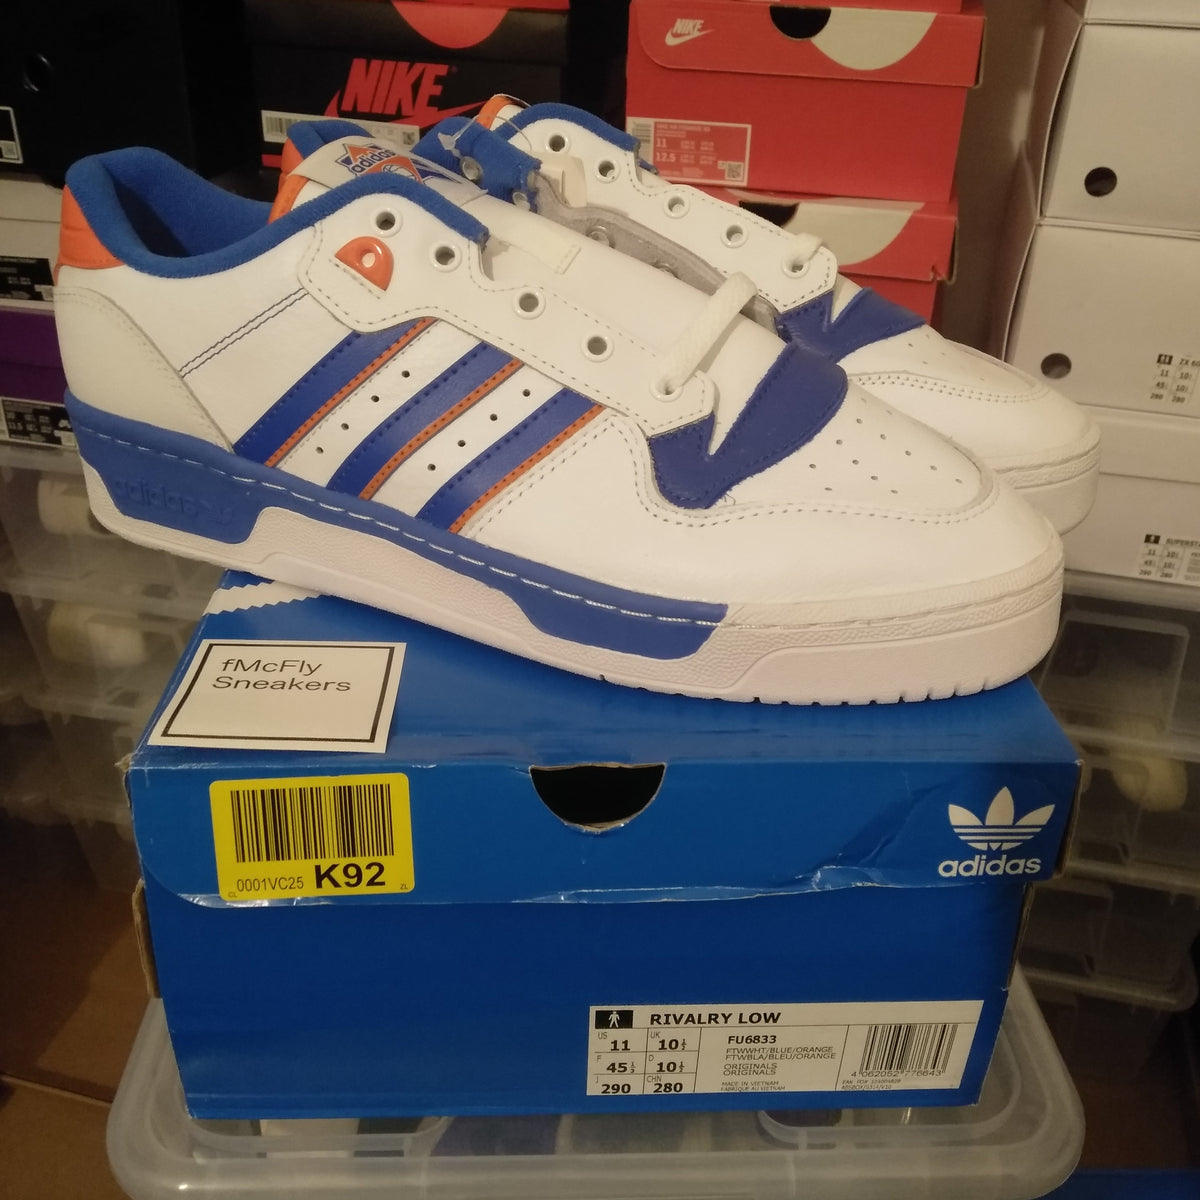 Adidas Originals Rivalry Low – fMcFly Sneakers